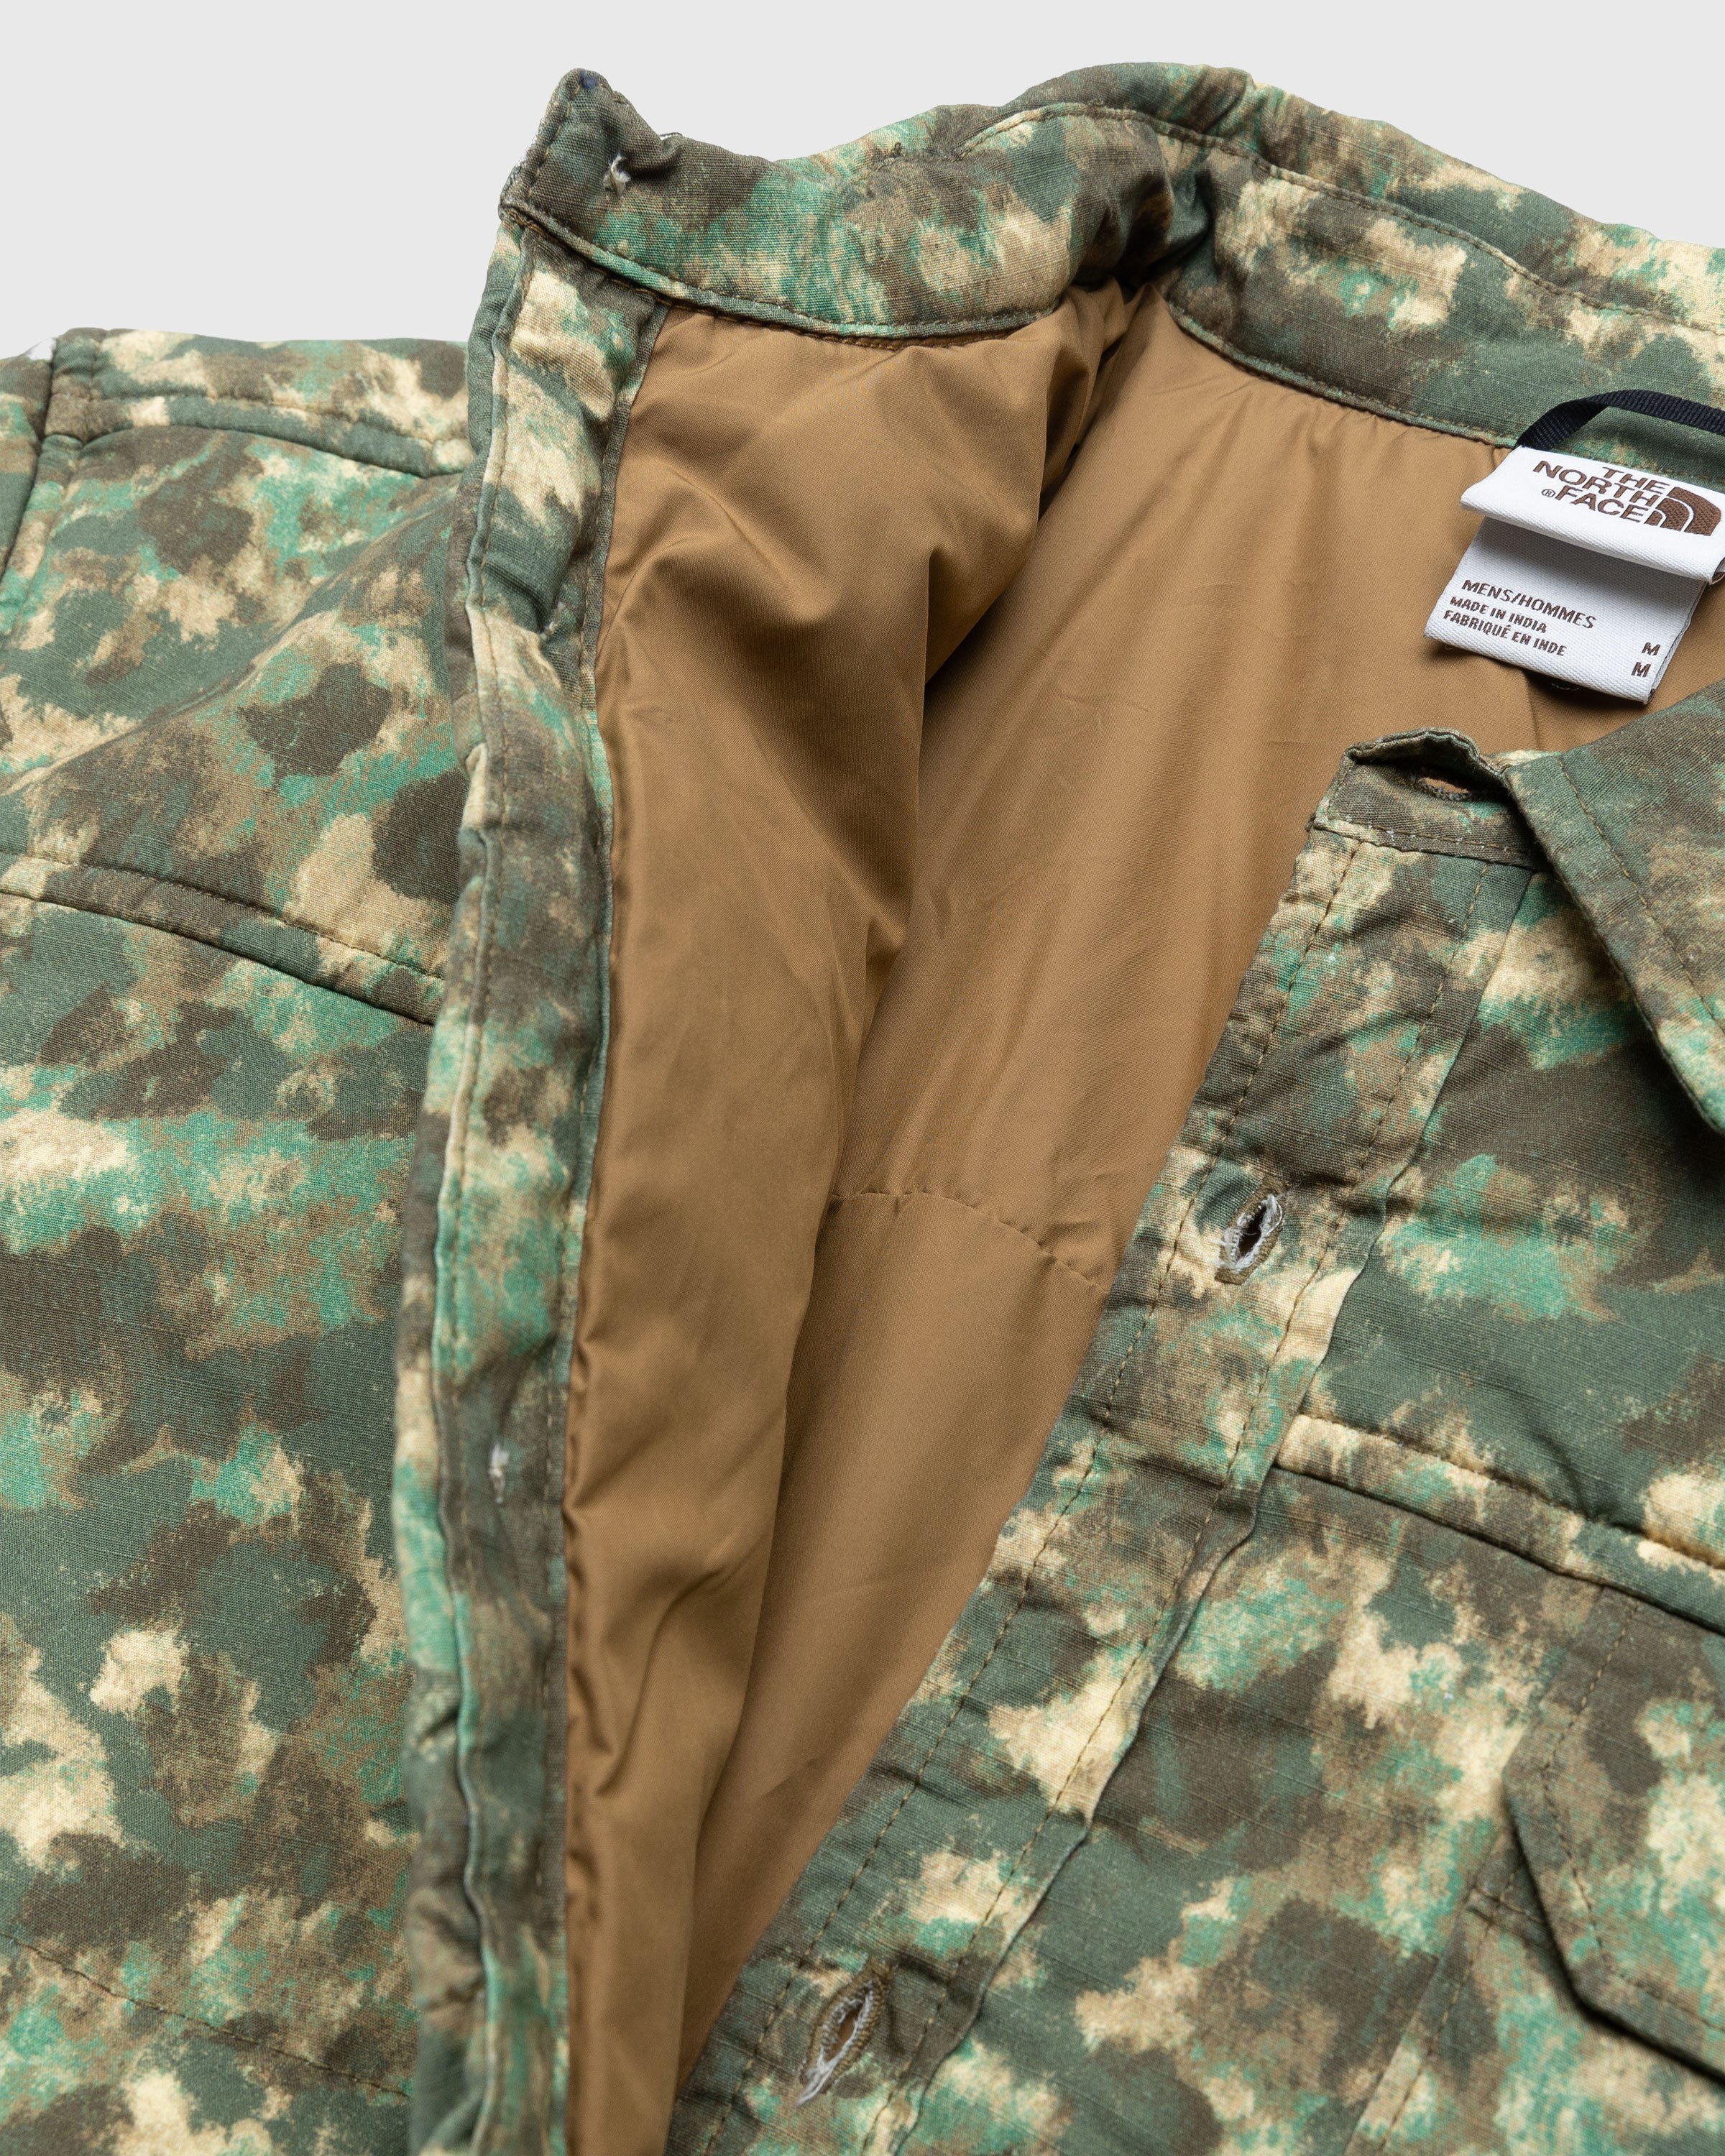 The North Face - M66 Stuffed Shirt Jacket Military Olive/Stippled Camo Print - Clothing - Green - Image 4